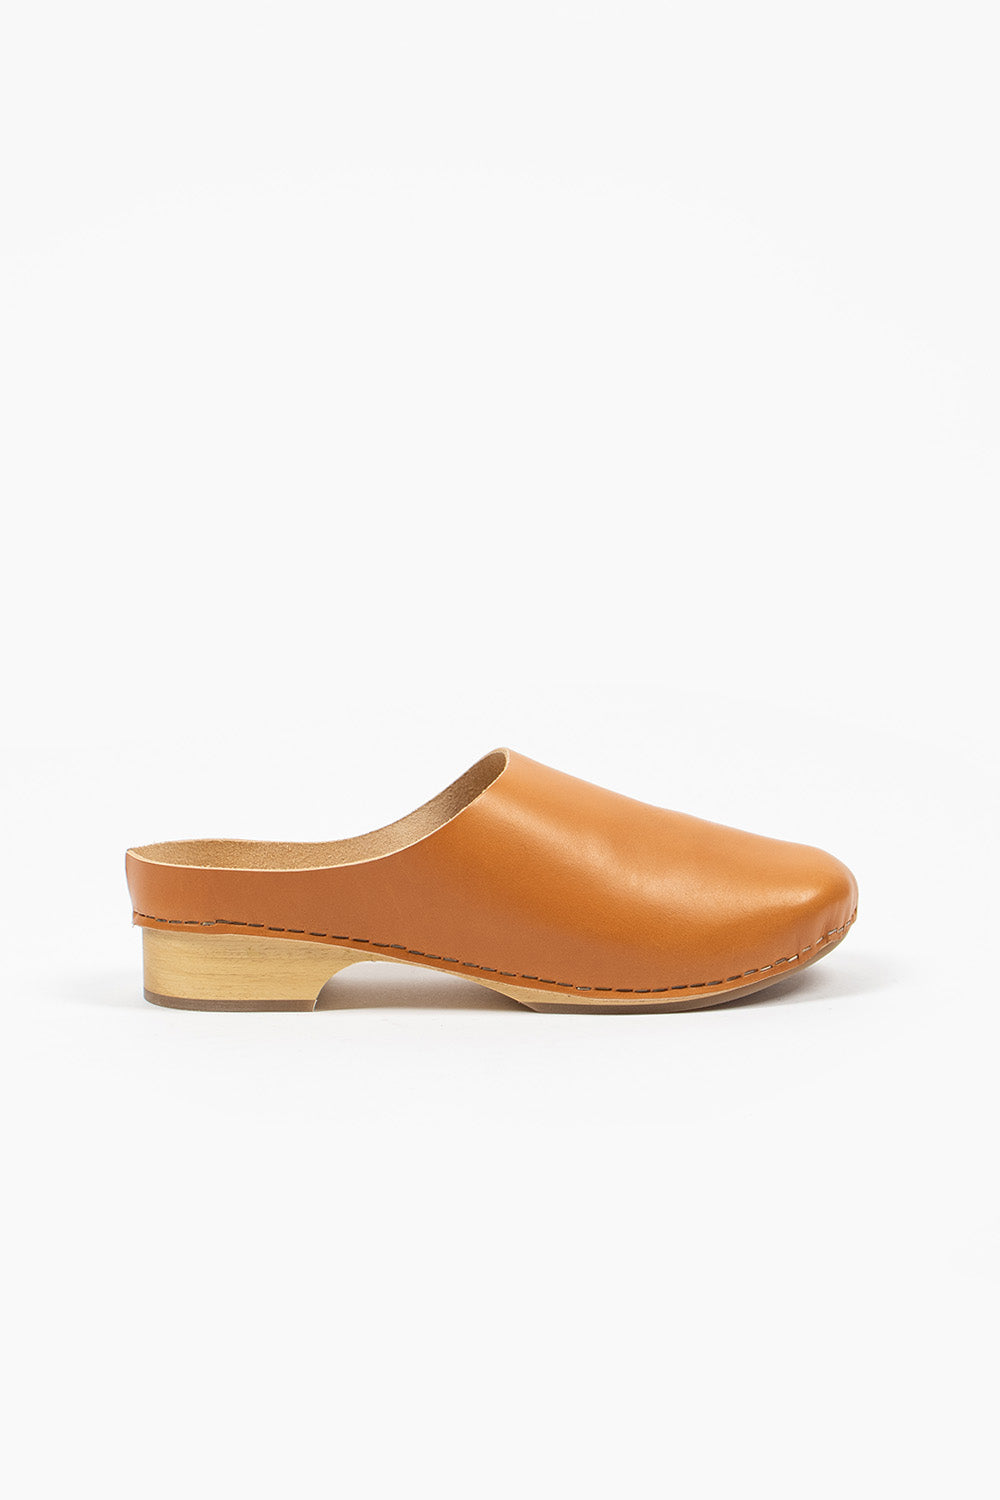 Low Leather Clog Natural